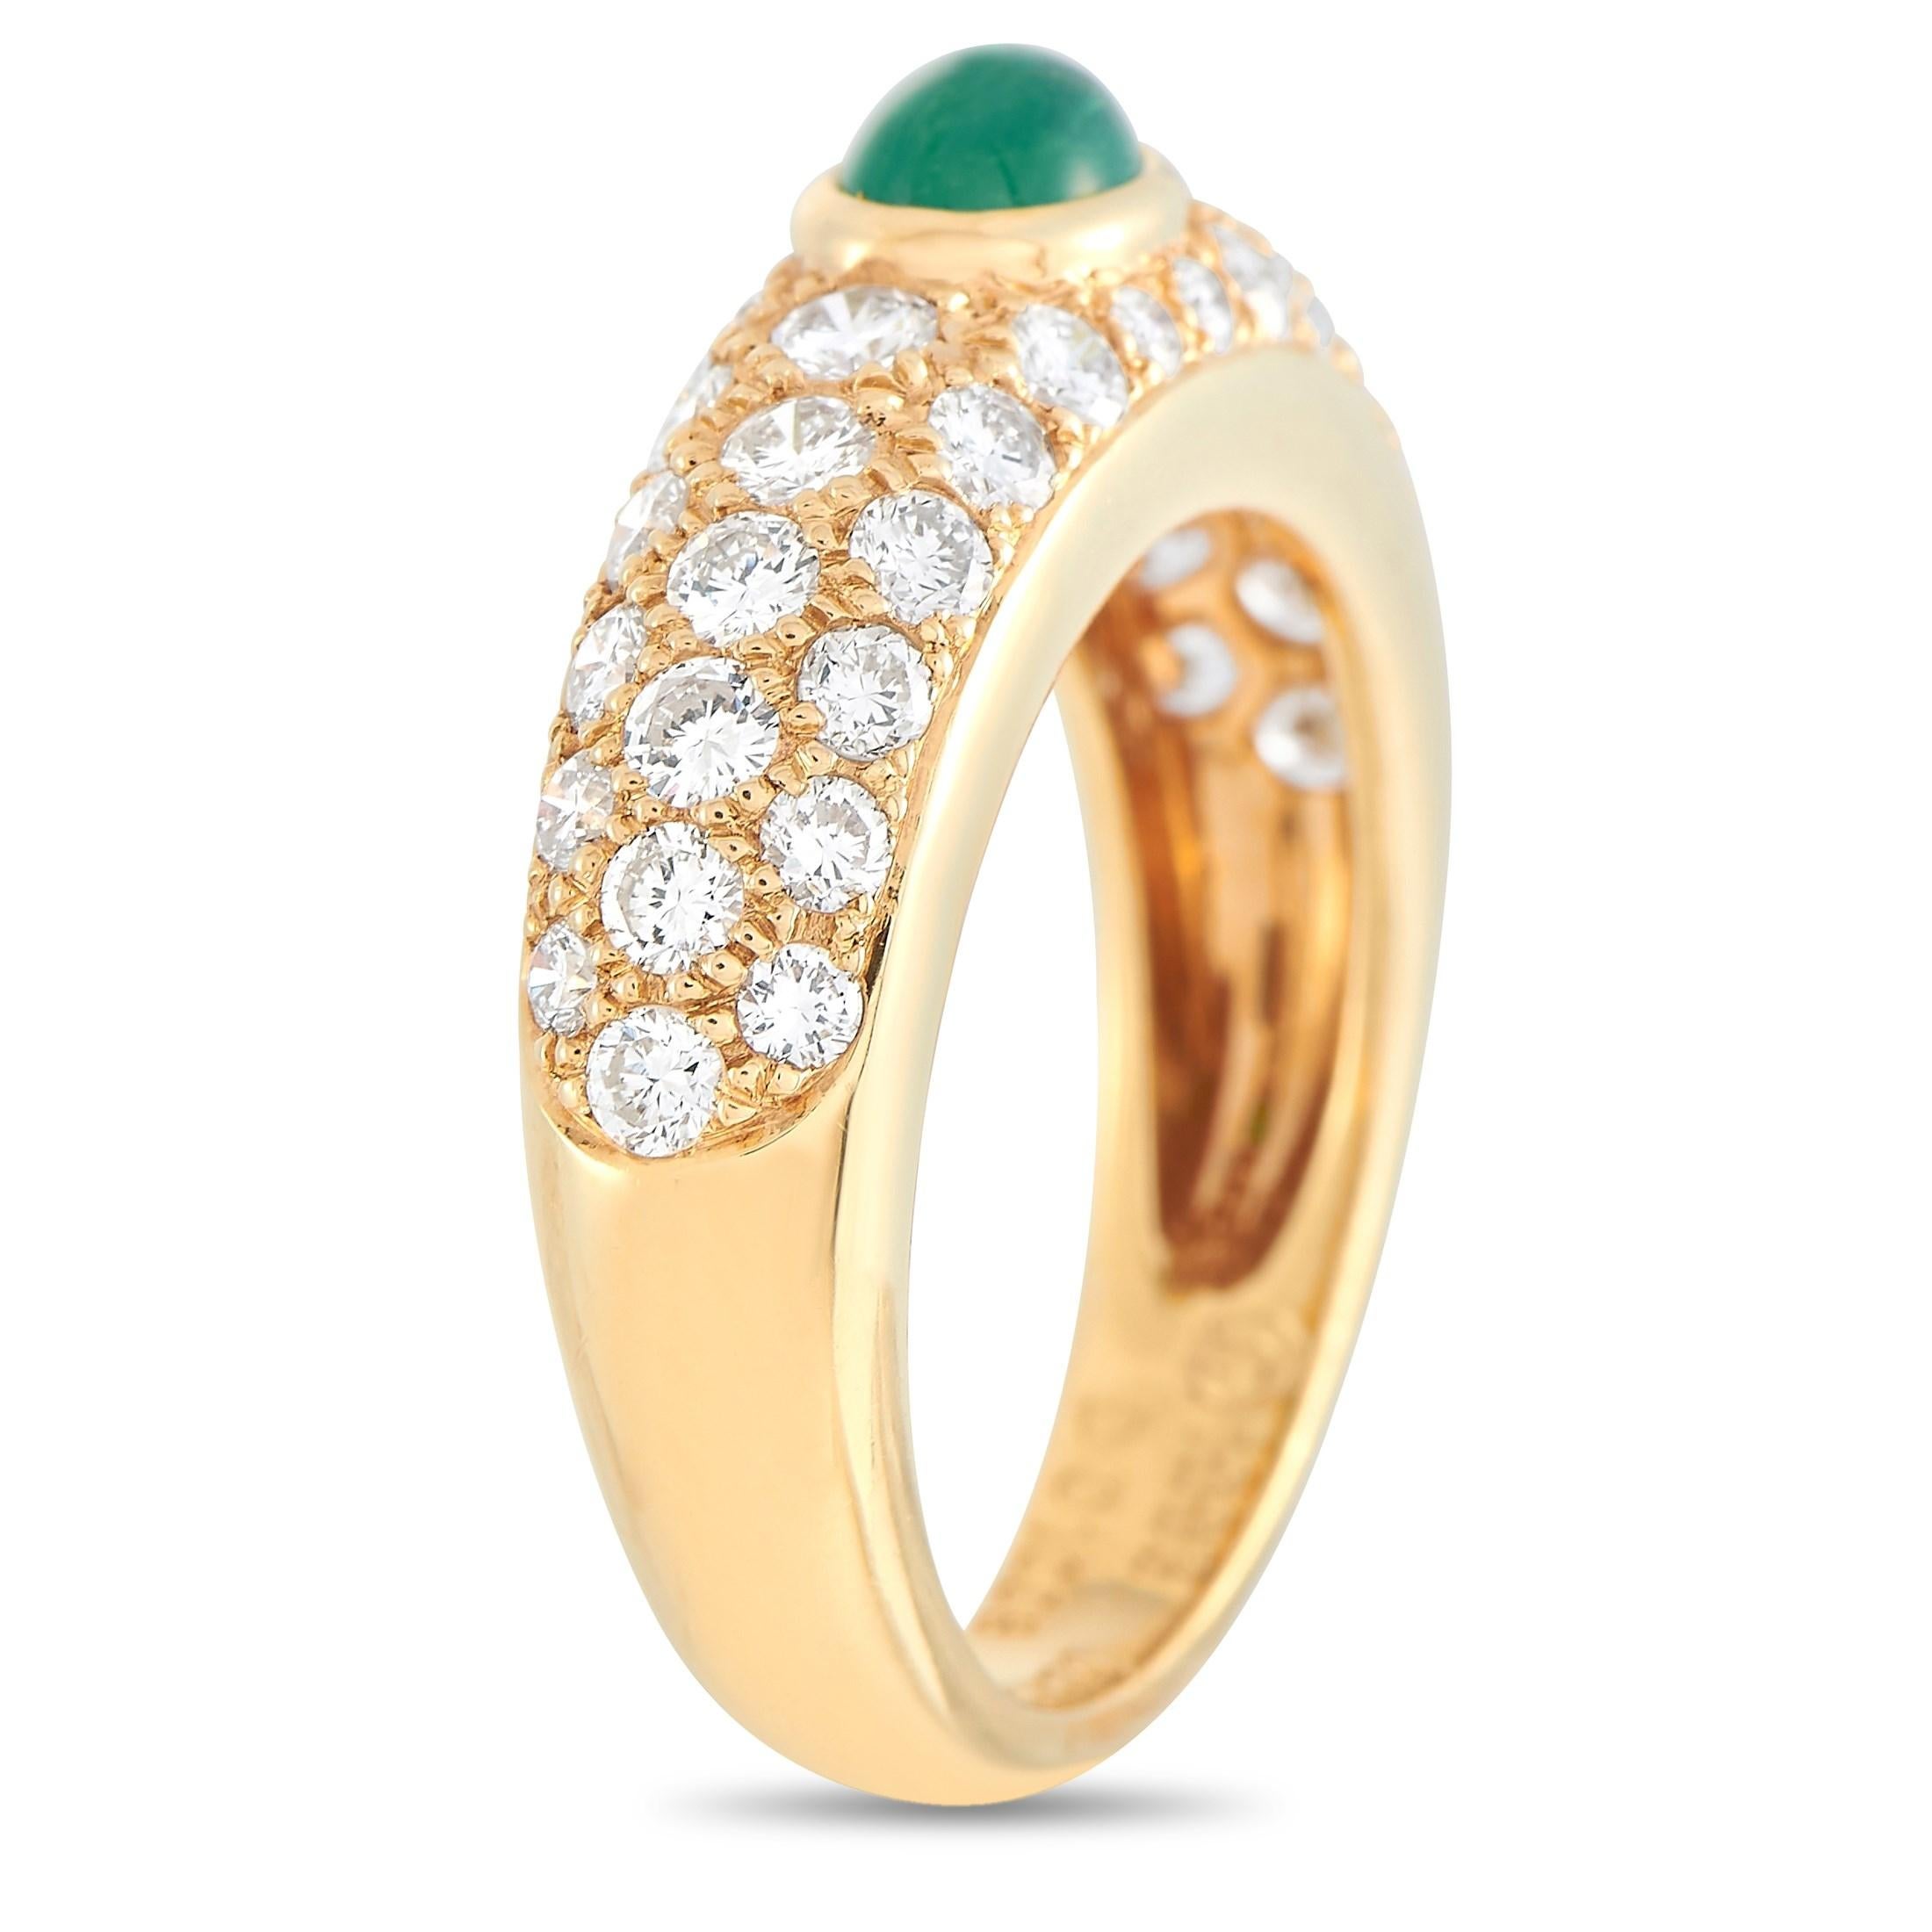 This Cartier 18K Yellow Gold 1.00 ct Diamond and Emerald Cabochon Ring is a dazzling vintage statement piece. The band is made with 18K yellow gold and set with numerous glittering round-cut diamonds throughout the band, that are E color, VS